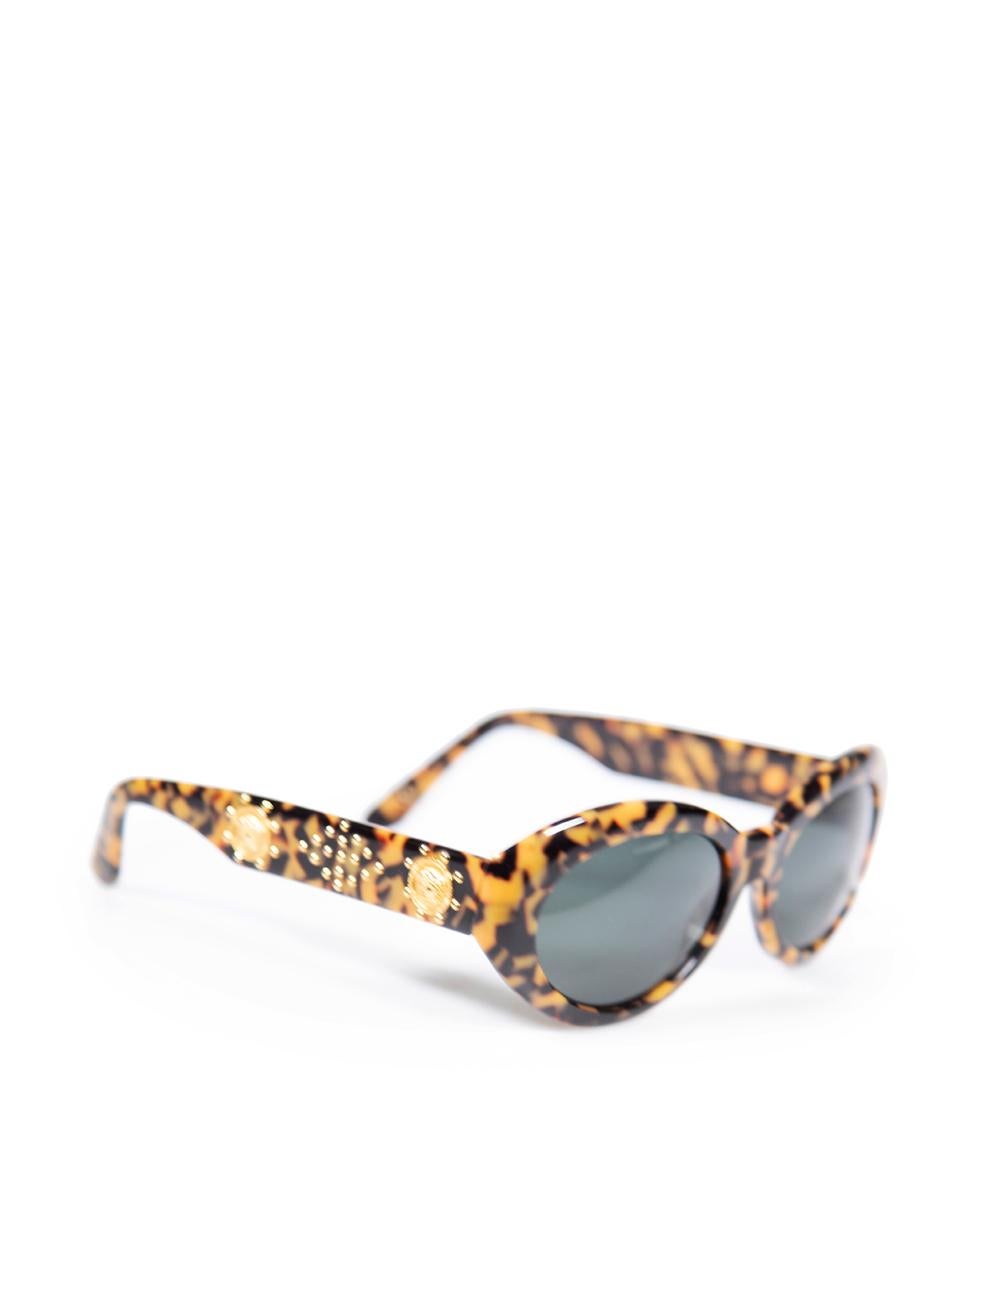 CONDITION is Very good. Hardly any visible wear to sunglasses is evident on this used Gianni Versace designer resale item. These sunglasses come with original case.
 
 
 
 Details
 
 
 Brown
 
 Plastic
 
 Cat eye sunglasses
 
 Tortoiseshell accent
